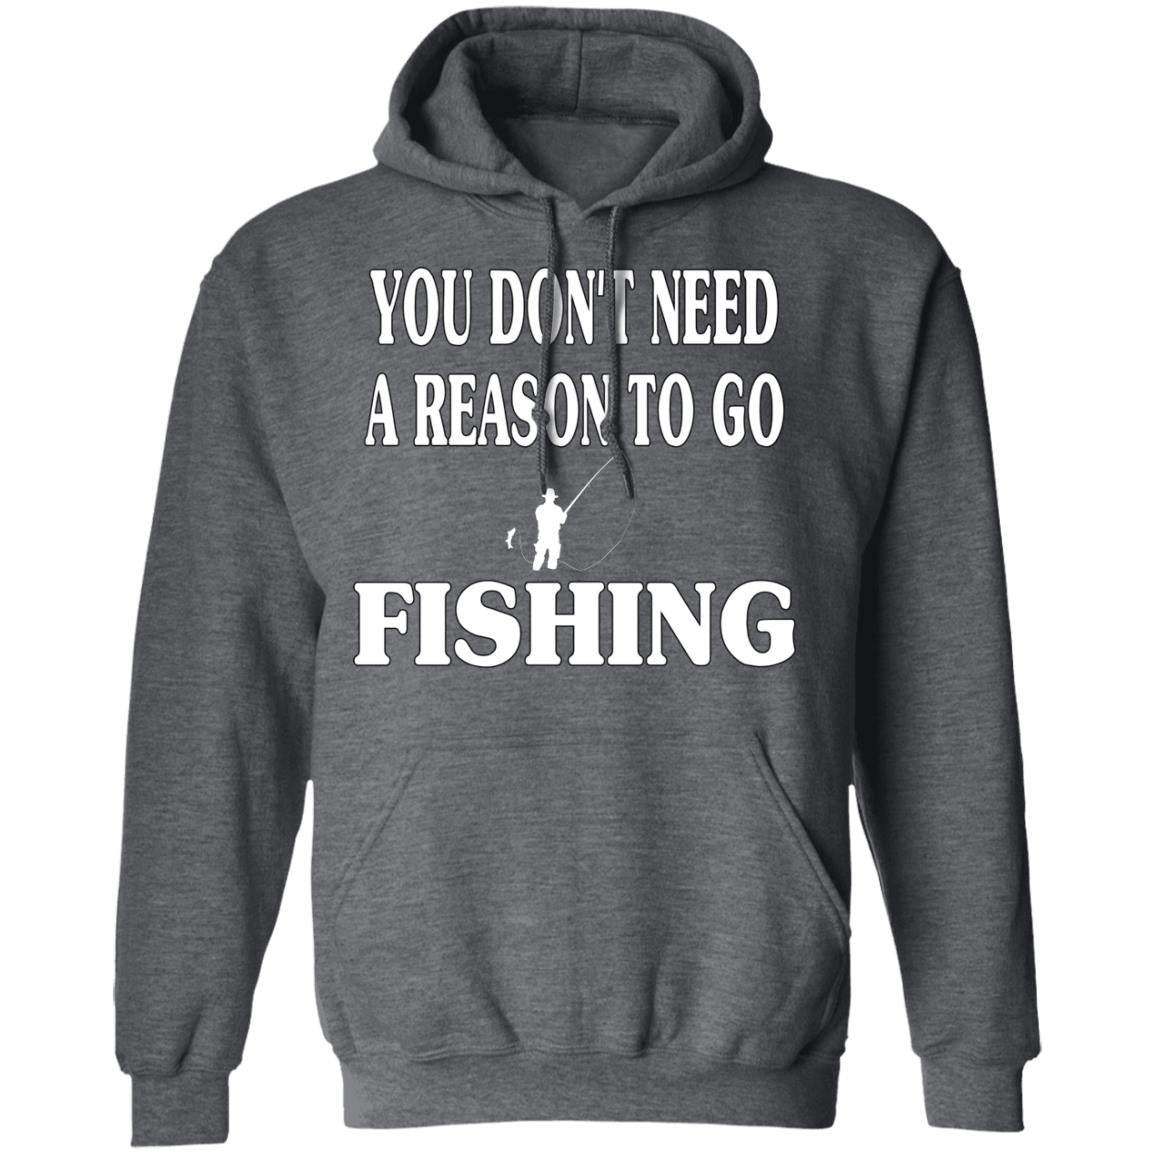 You don't need a reason to go fishing hoodie dark-heather